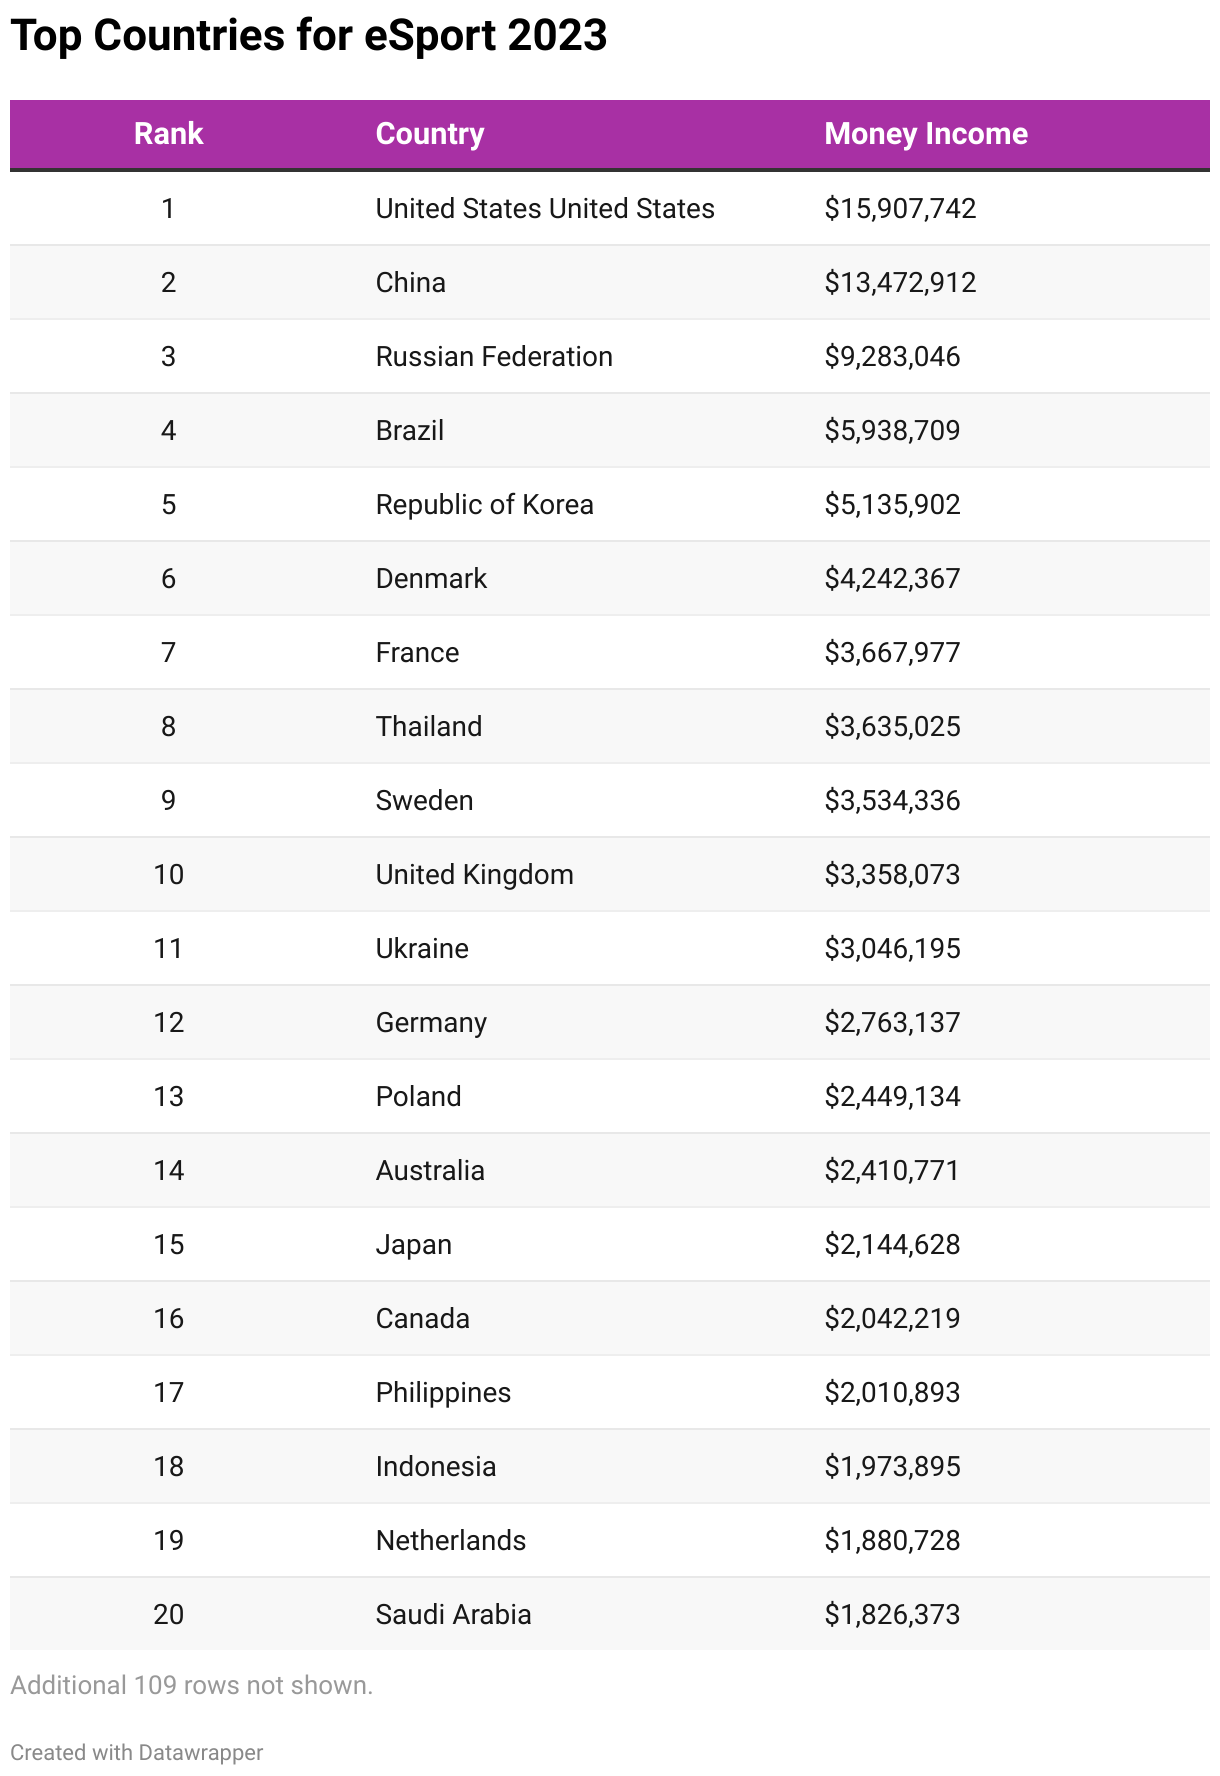 Top countries for esports